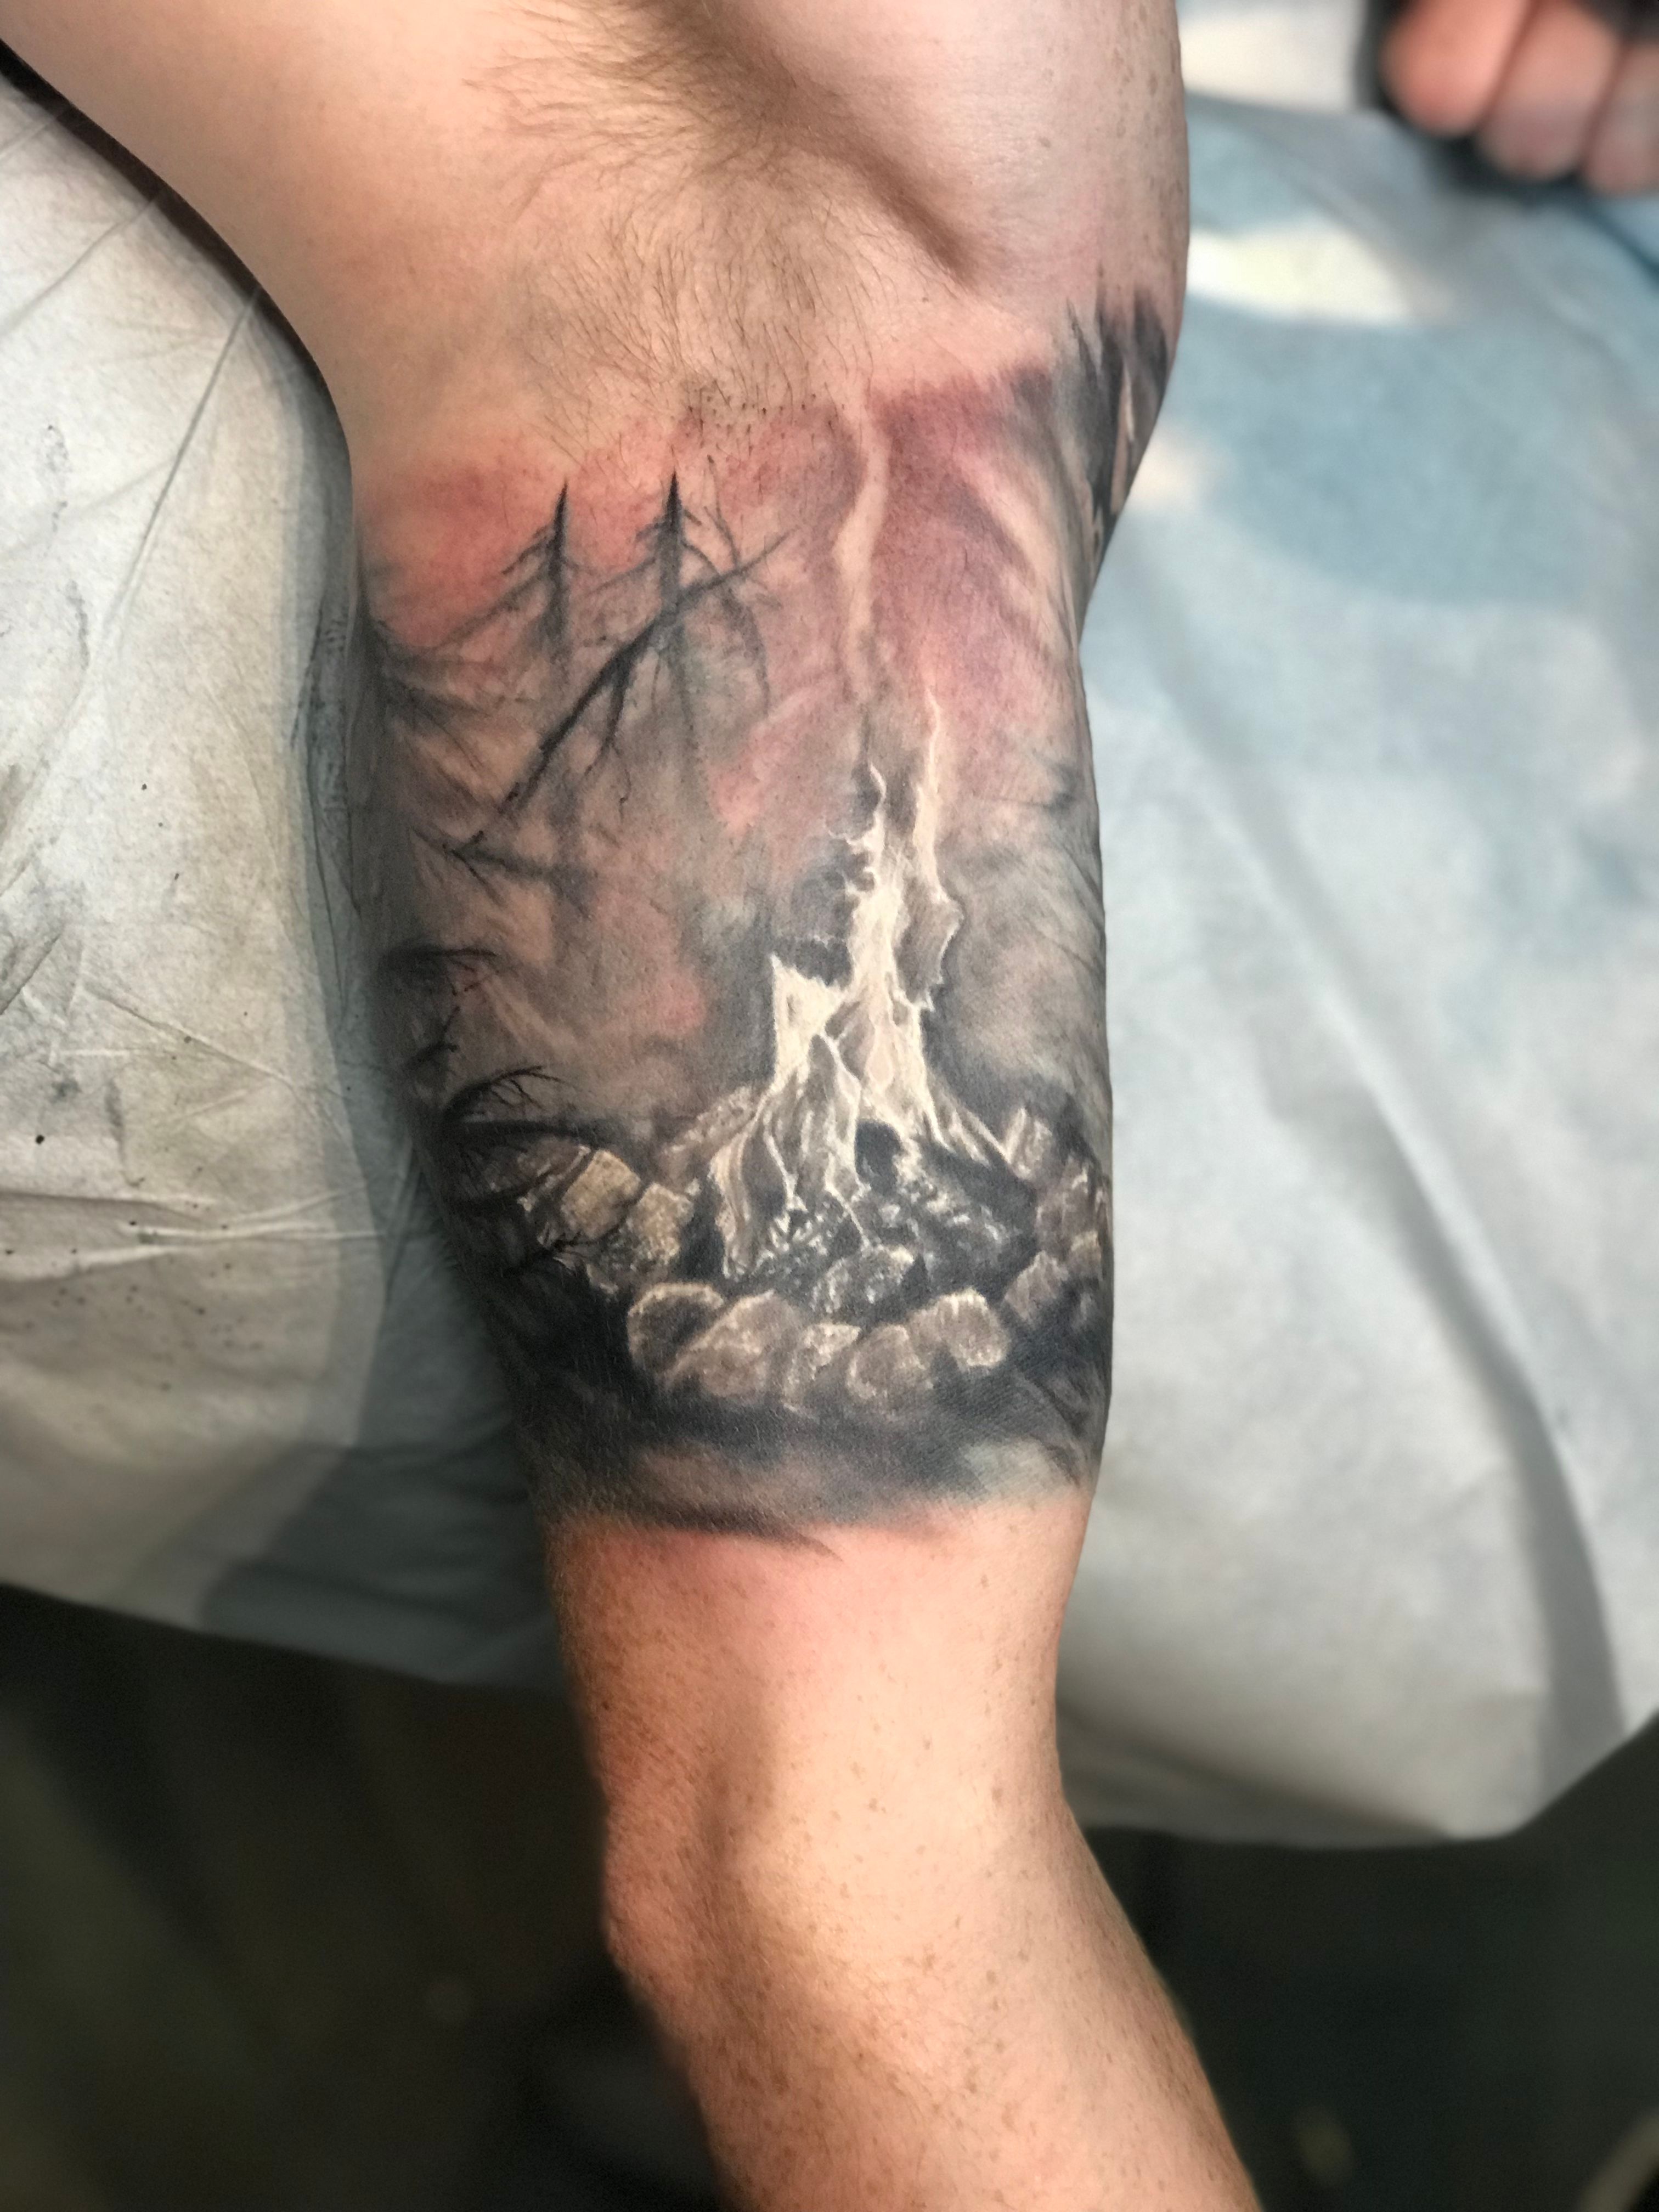 Seven Wonders tattoo parlour  Start of a survivalist sleeve from last  week Thanks Harry Some spaces left in January drop me a message to  discuss ideas   Facebook